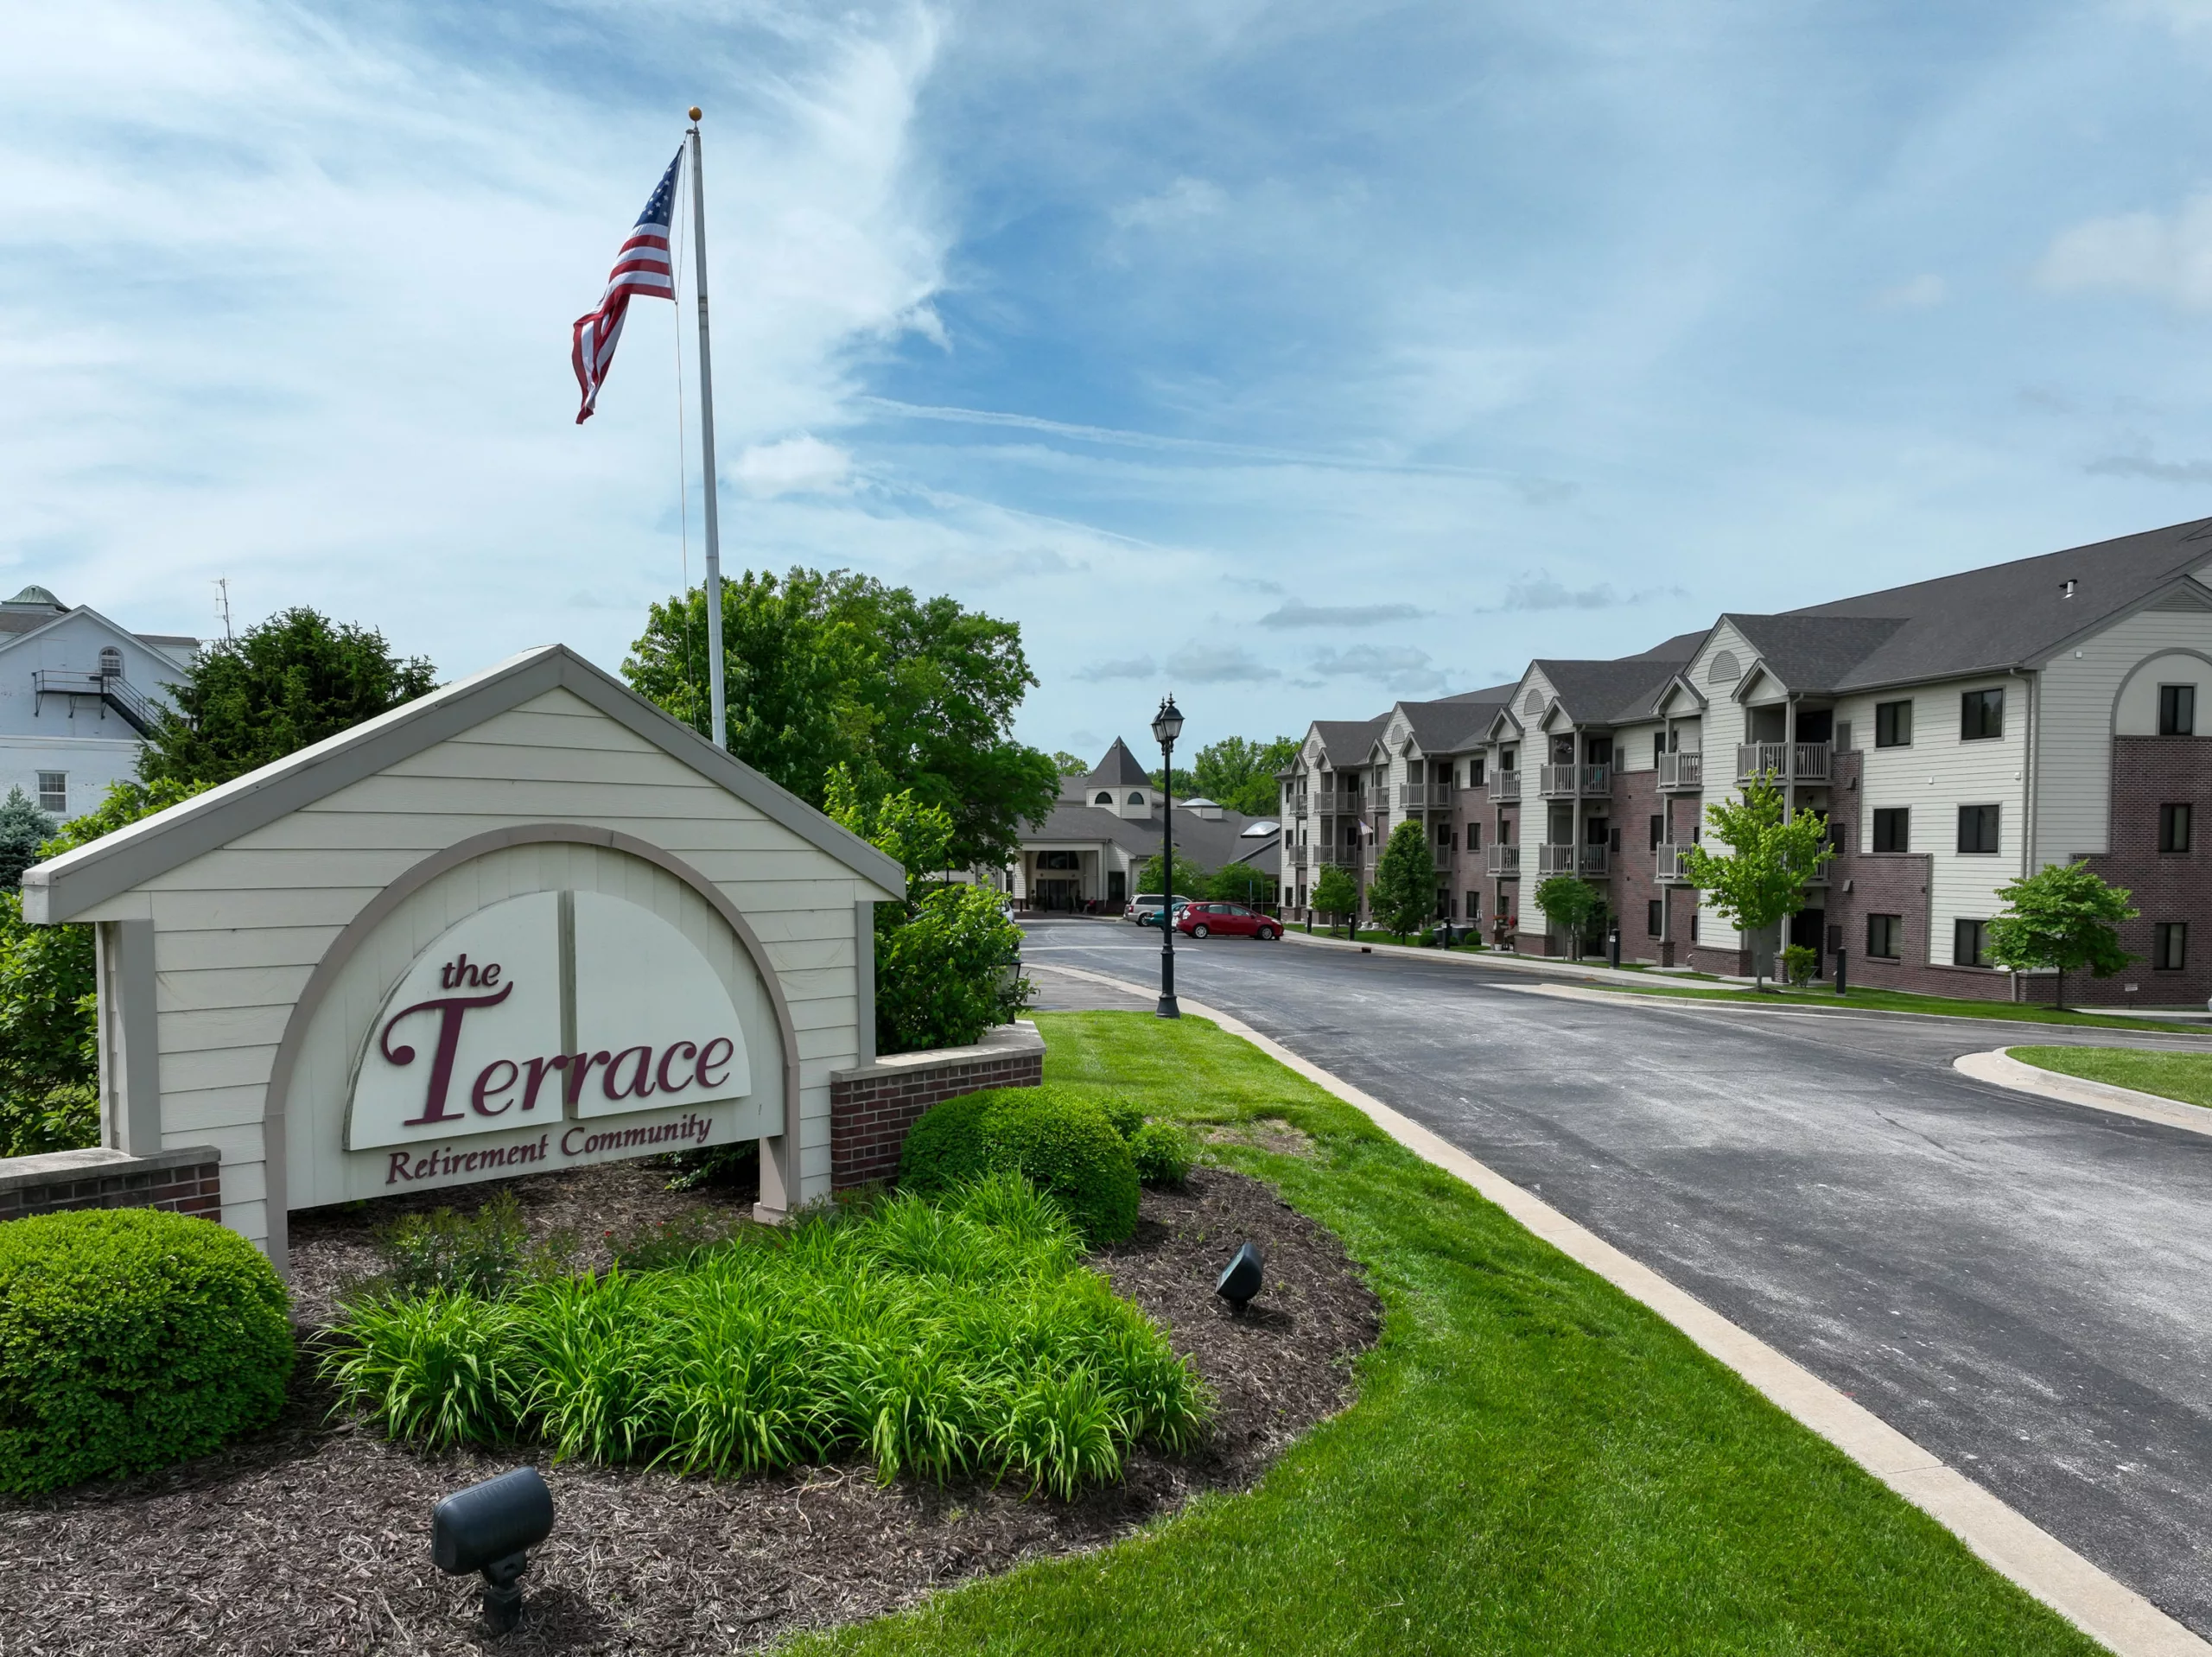 The Terrace Retirement Community entrance sign with an American Flag behind it and the senior apartments.